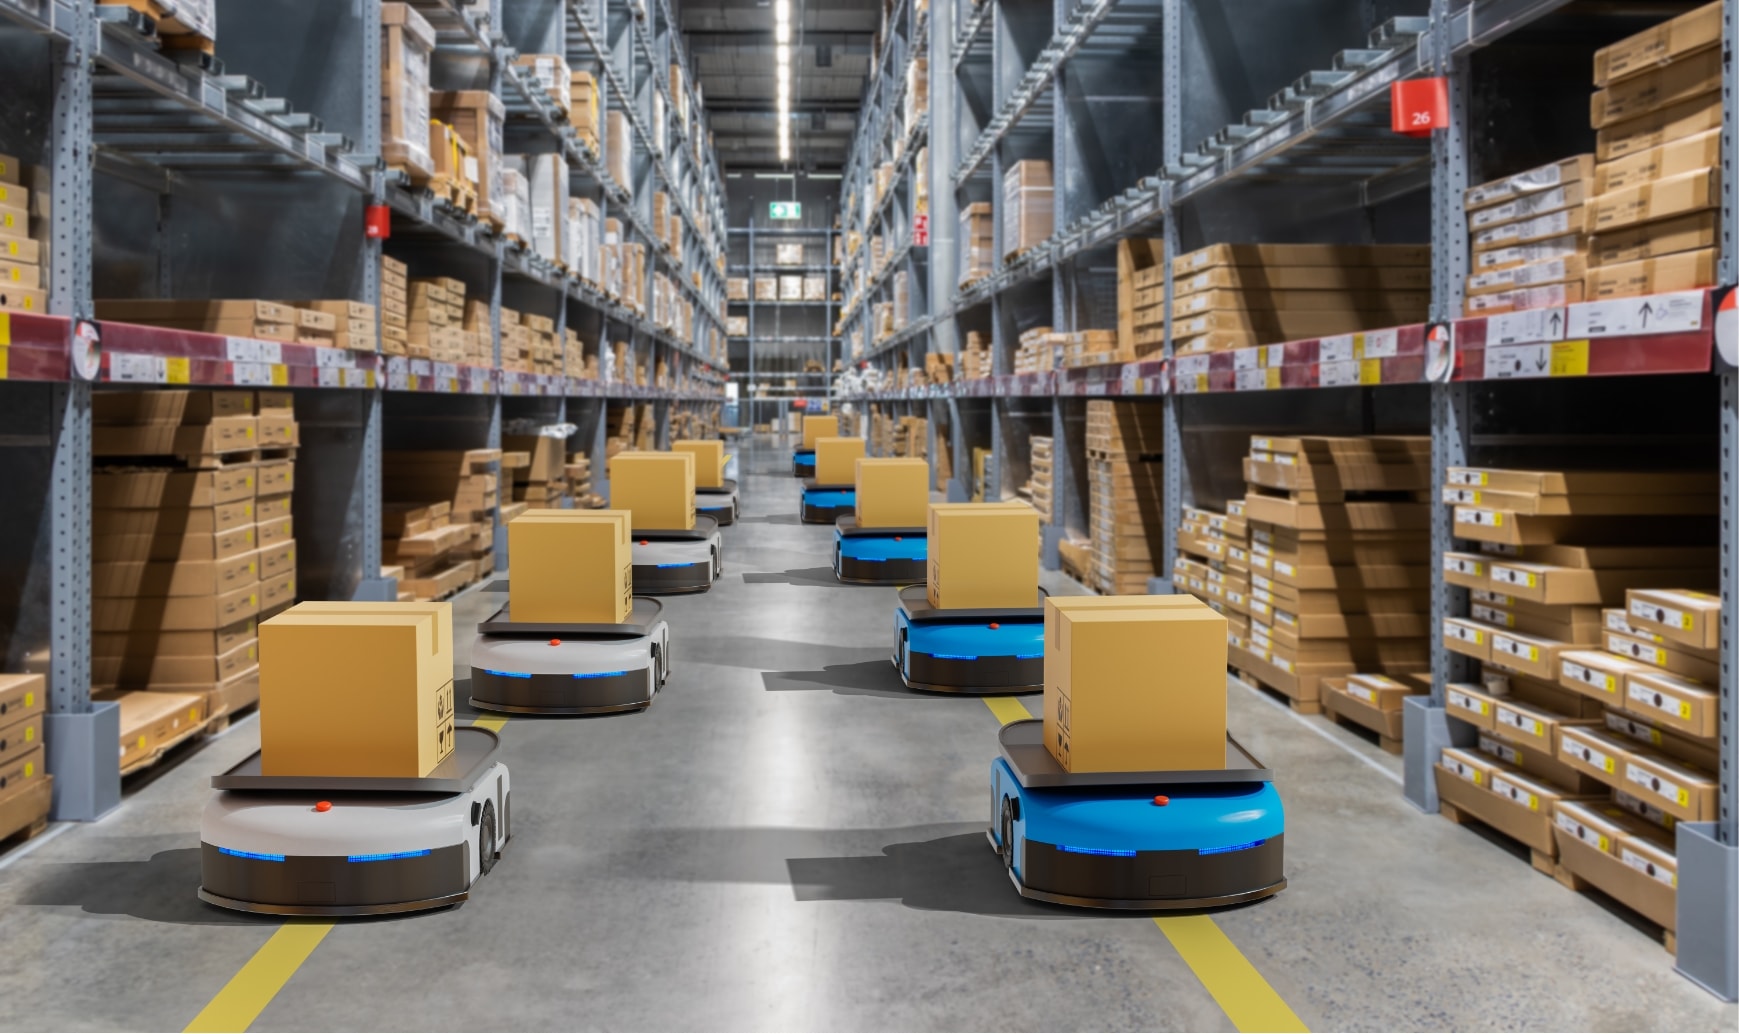 Several robots carry parcels in a warehouse.